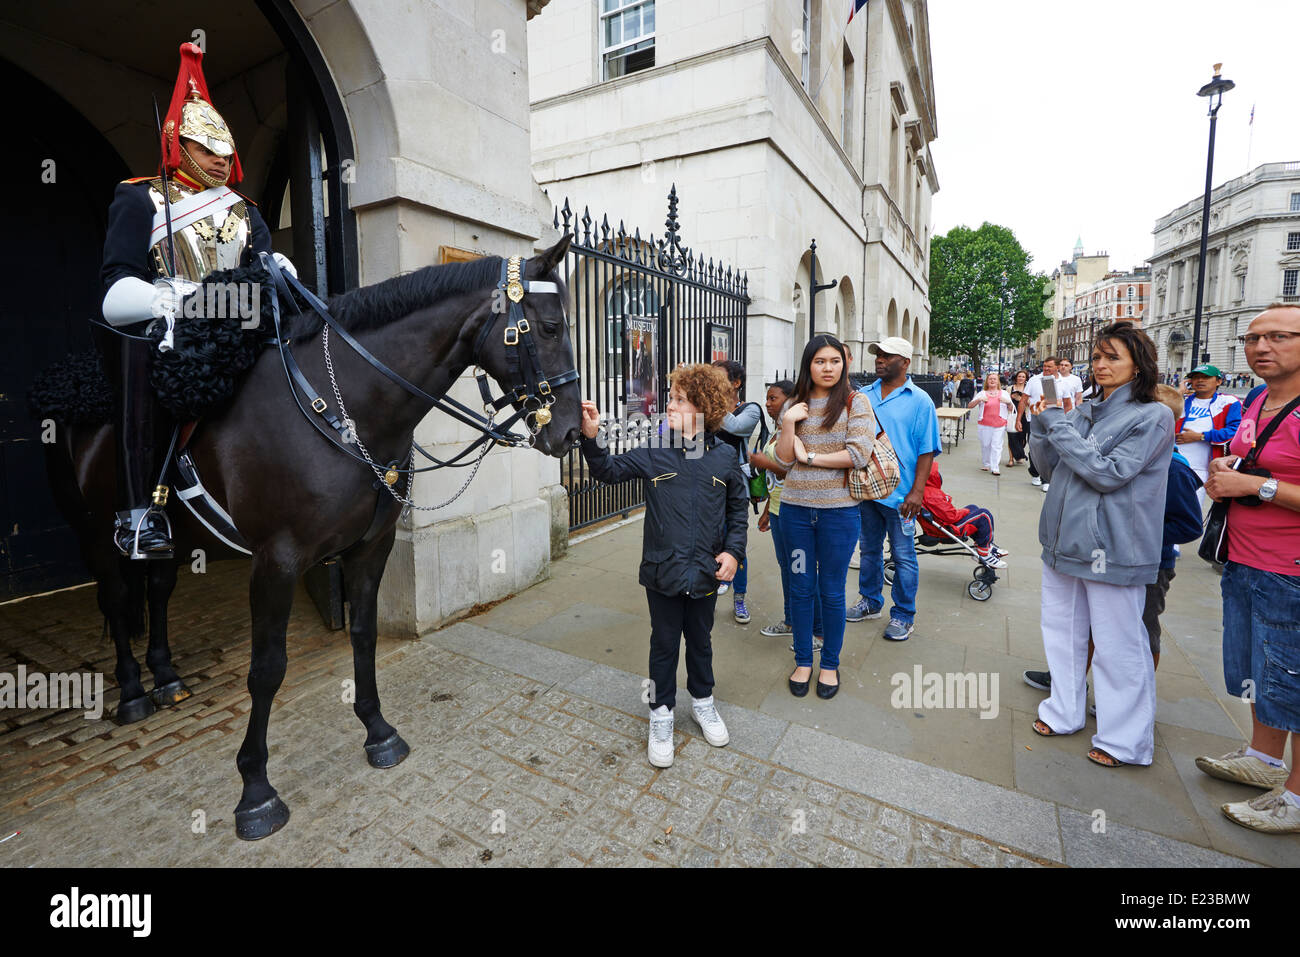 Crowds taking photographs of a guard at Horse Guards Parade Whitehall London UK Stock Photo